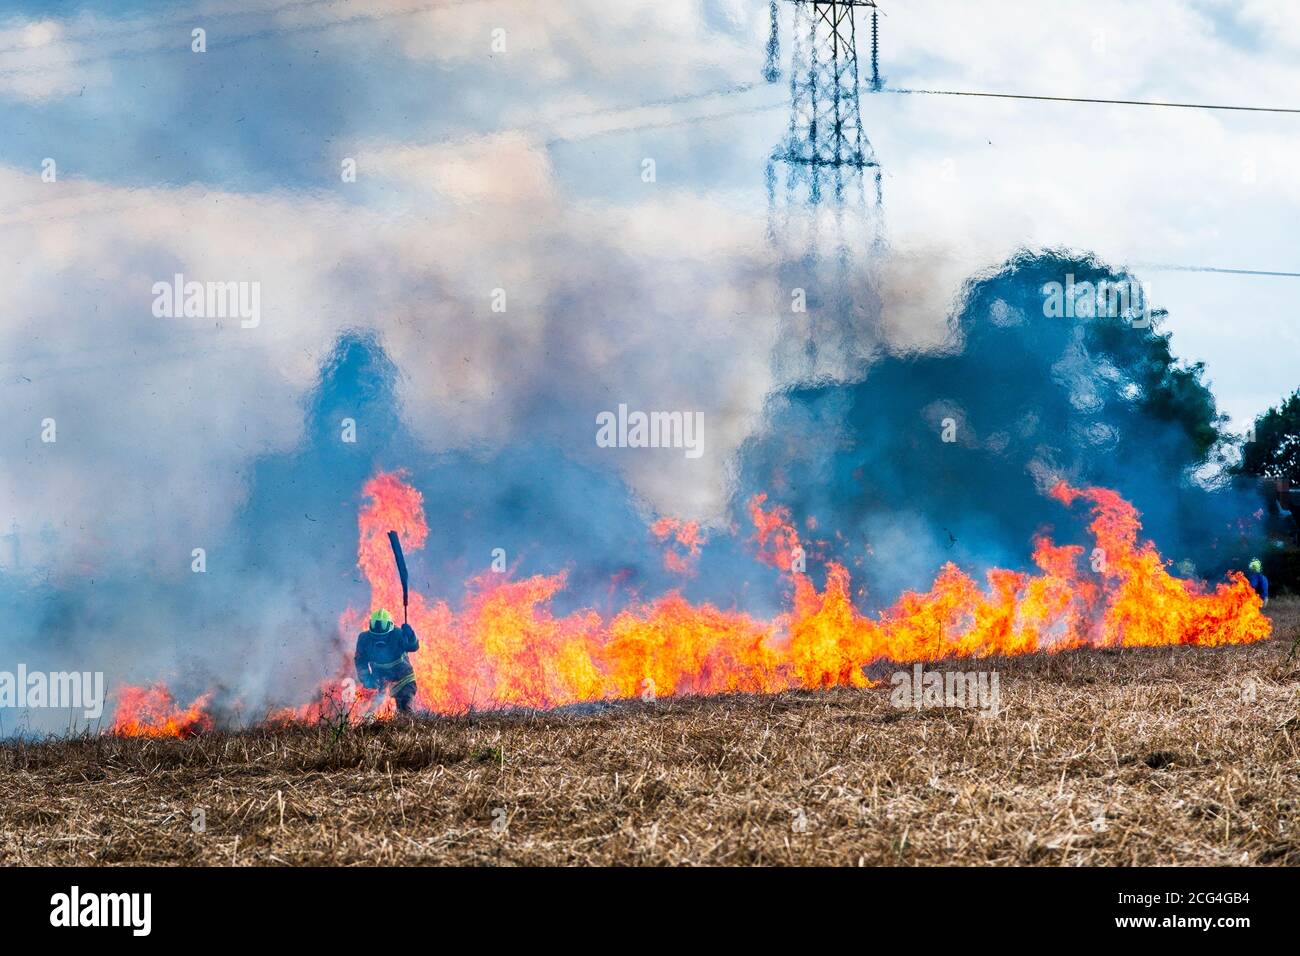 Firemen in breathing gear battle a crop fire believed to have been started deliberately. Stock Photo